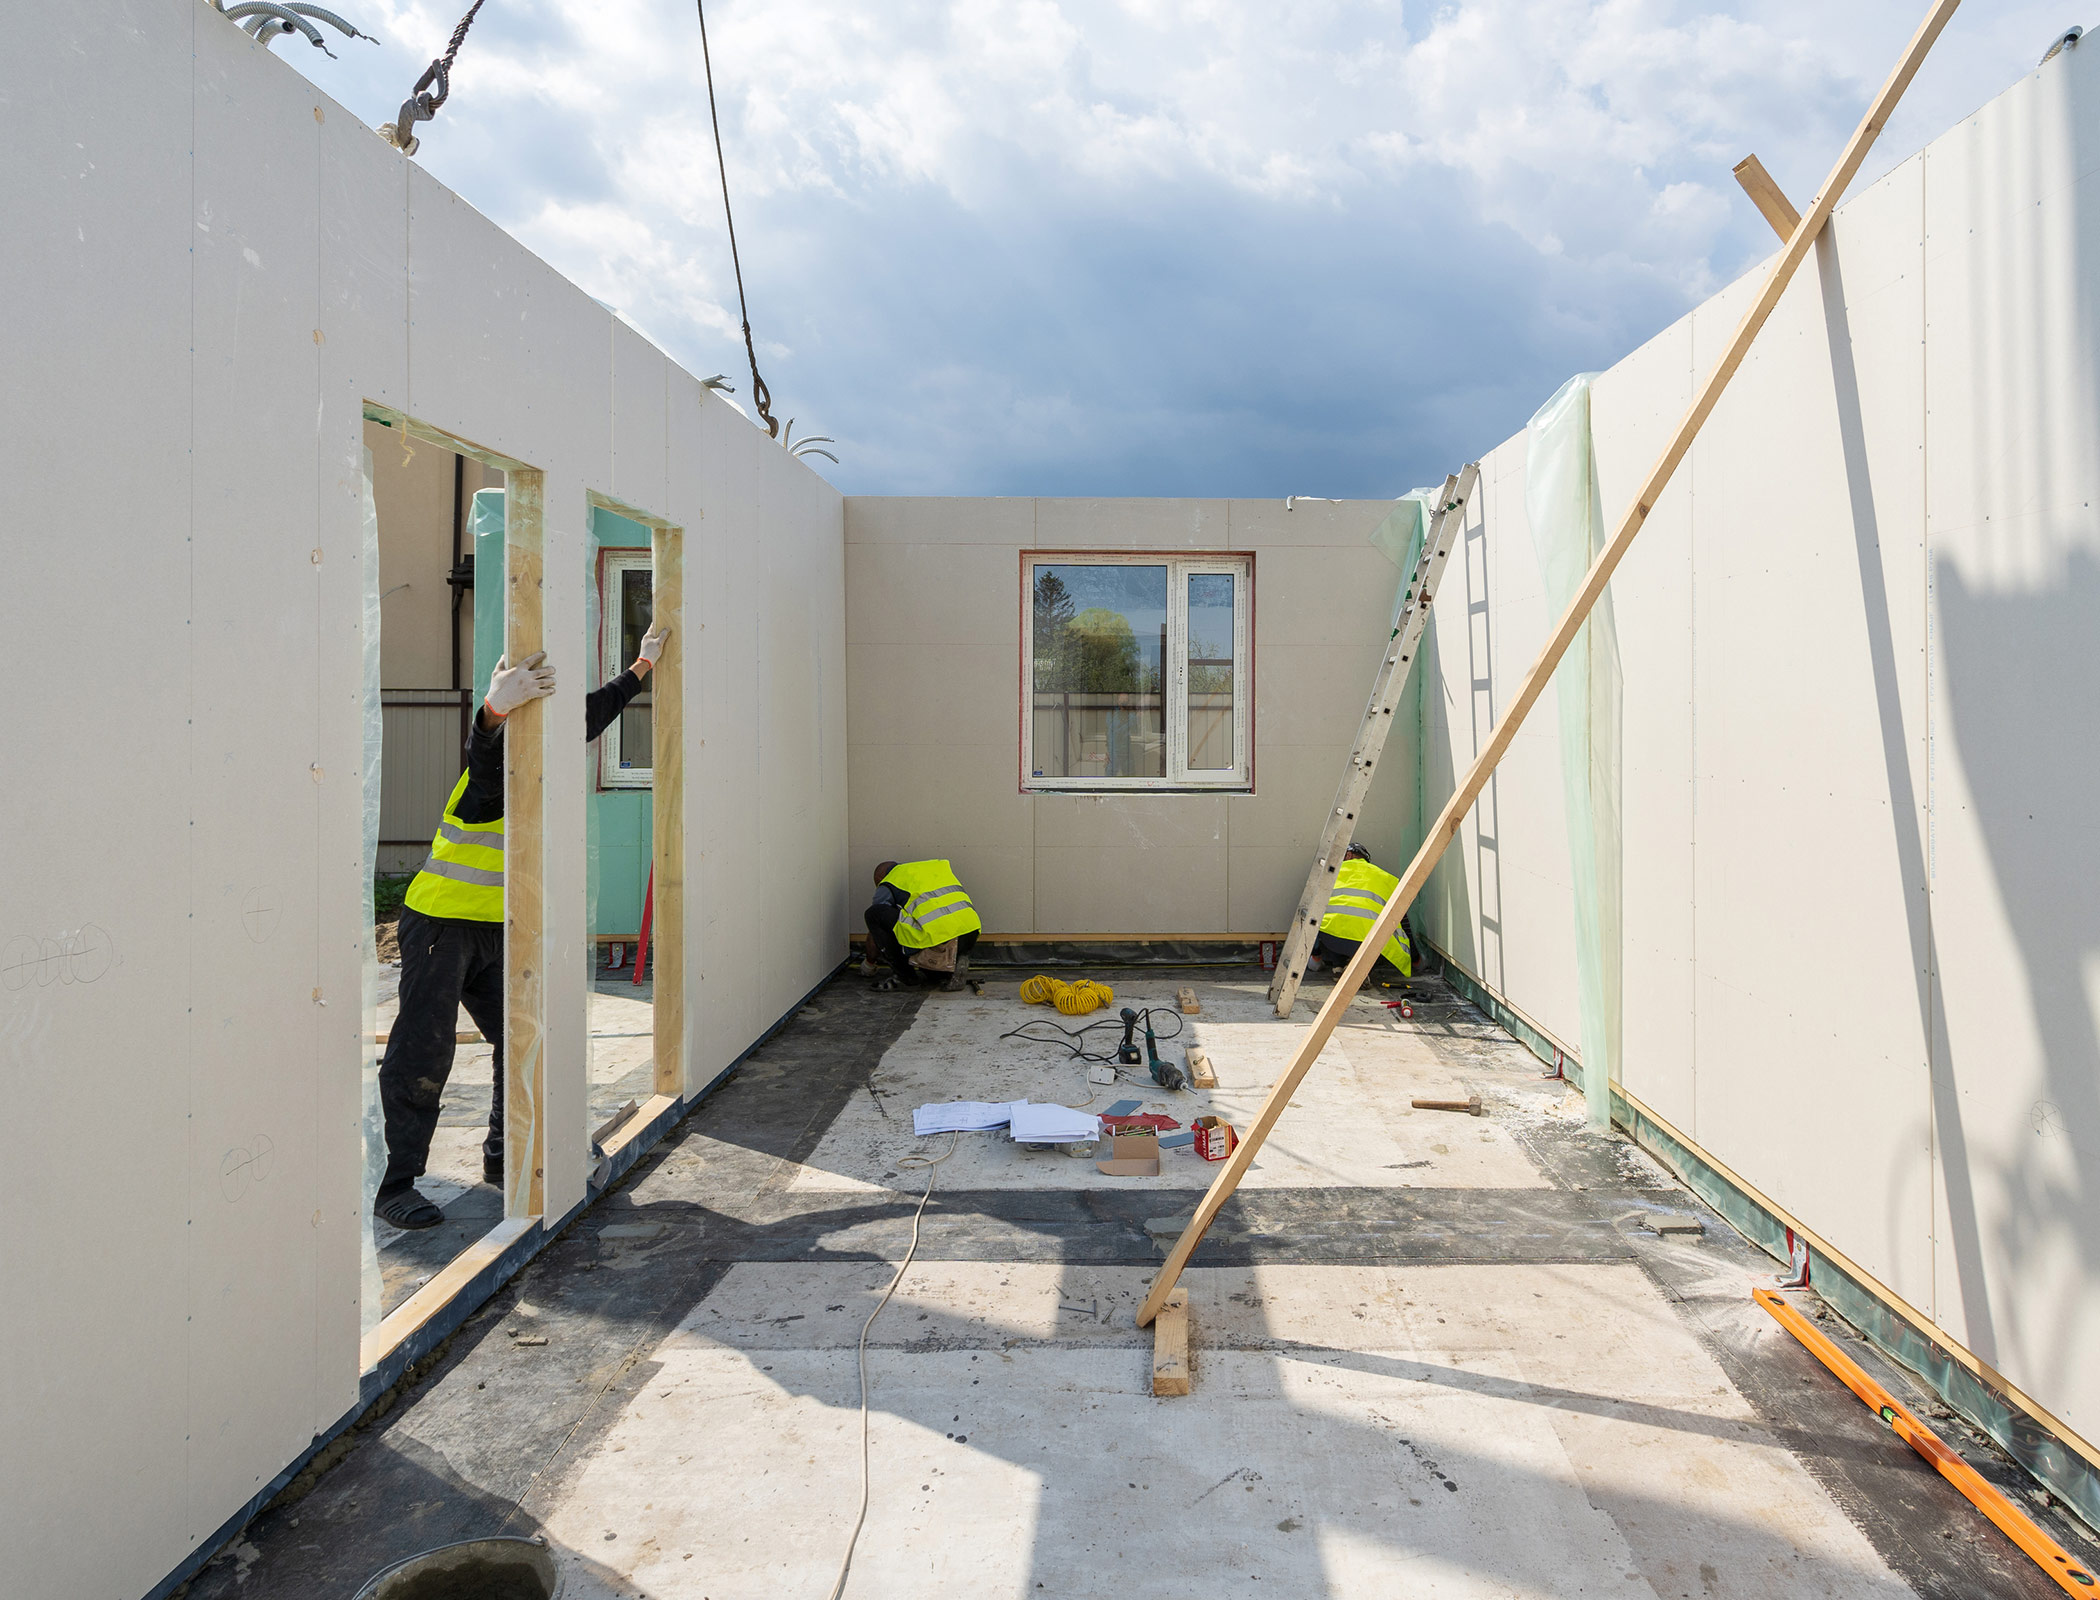 Modular housing could tackle housing crisis and improve energy efficiency